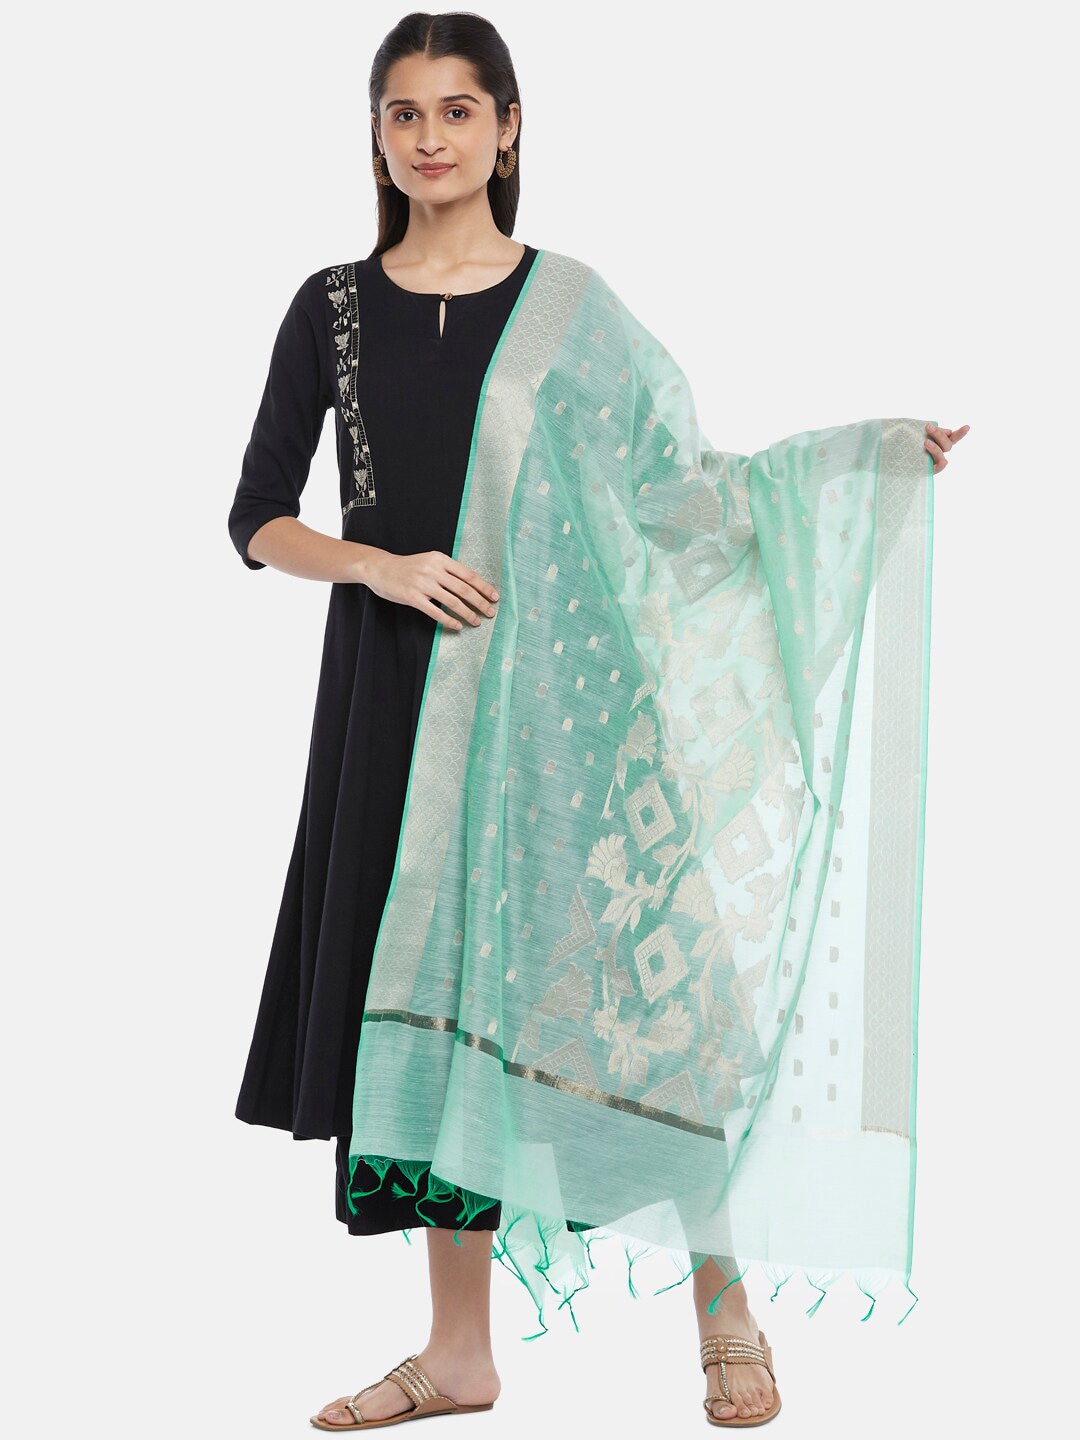 RANGMANCH BY PANTALOONS Turquoise Blue & Gold-Toned Ethnic Motifs Woven Design Dupatta Price in India